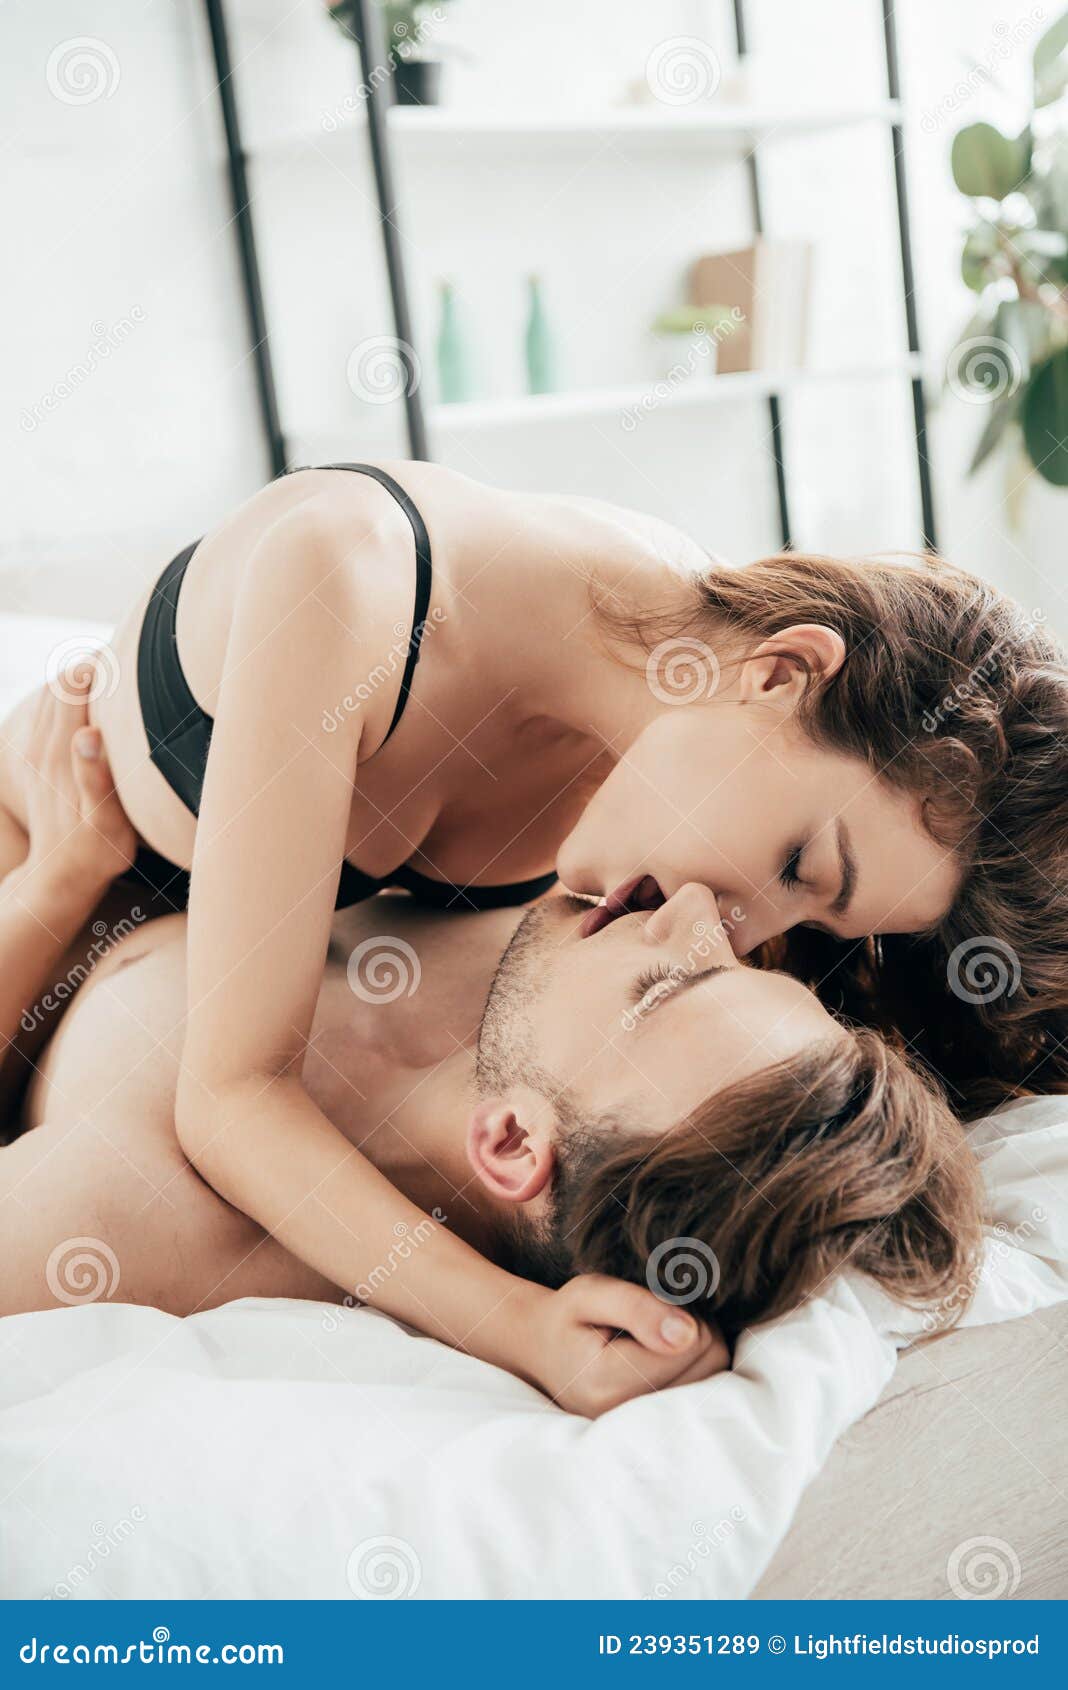 Lovers in Underwear Hugging and Kissing in Bedroom Stock Photo